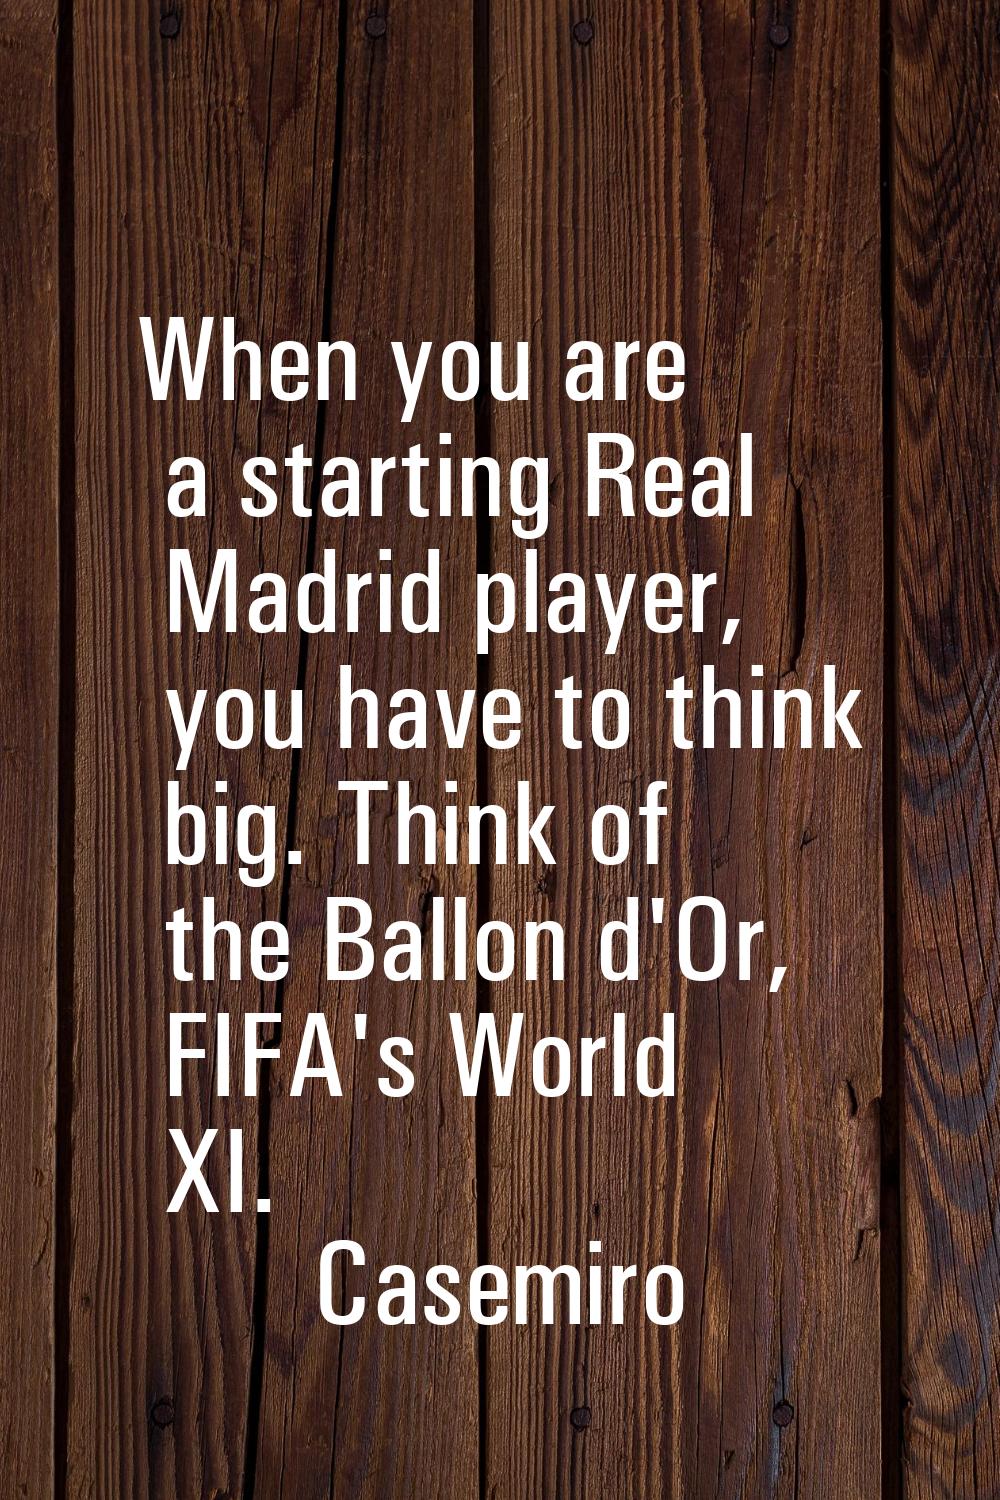 When you are a starting Real Madrid player, you have to think big. Think of the Ballon d'Or, FIFA's